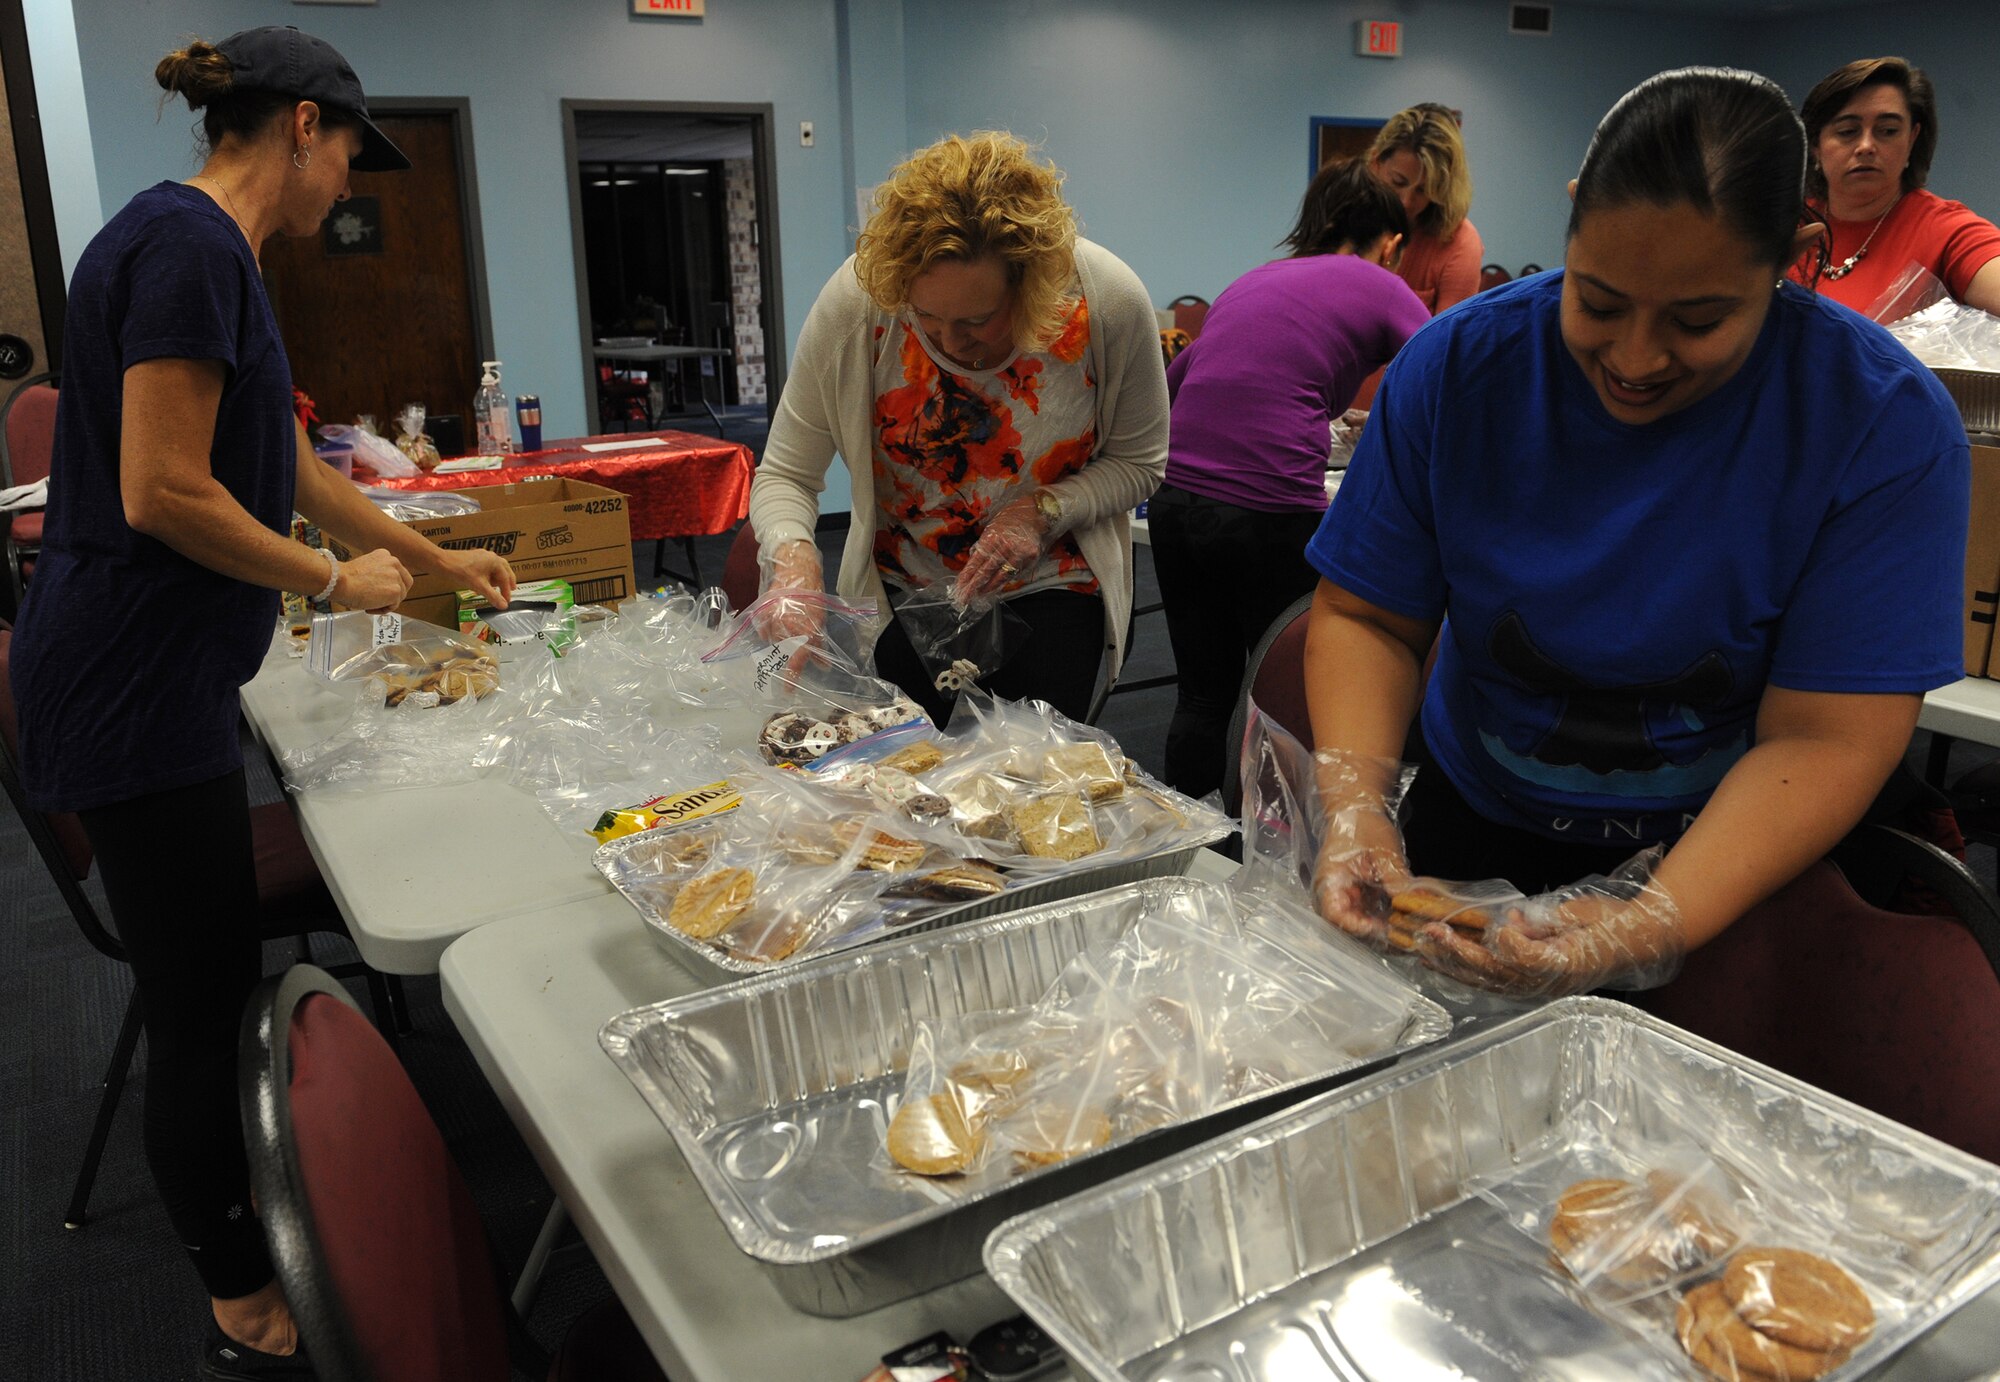 Moody Spouses Club sort cookies before placing them in bags during the Annual Airmen’s Cookie Drive, Dec. 2, 2015, at Moody Air Force Base, Ga. The volunteers packed each bag with 15 to 20 cookies for Airmen living in the dorms. (U.S. Air Force photo by Airman 1st Class Kathleen D. Bryant/Released)
